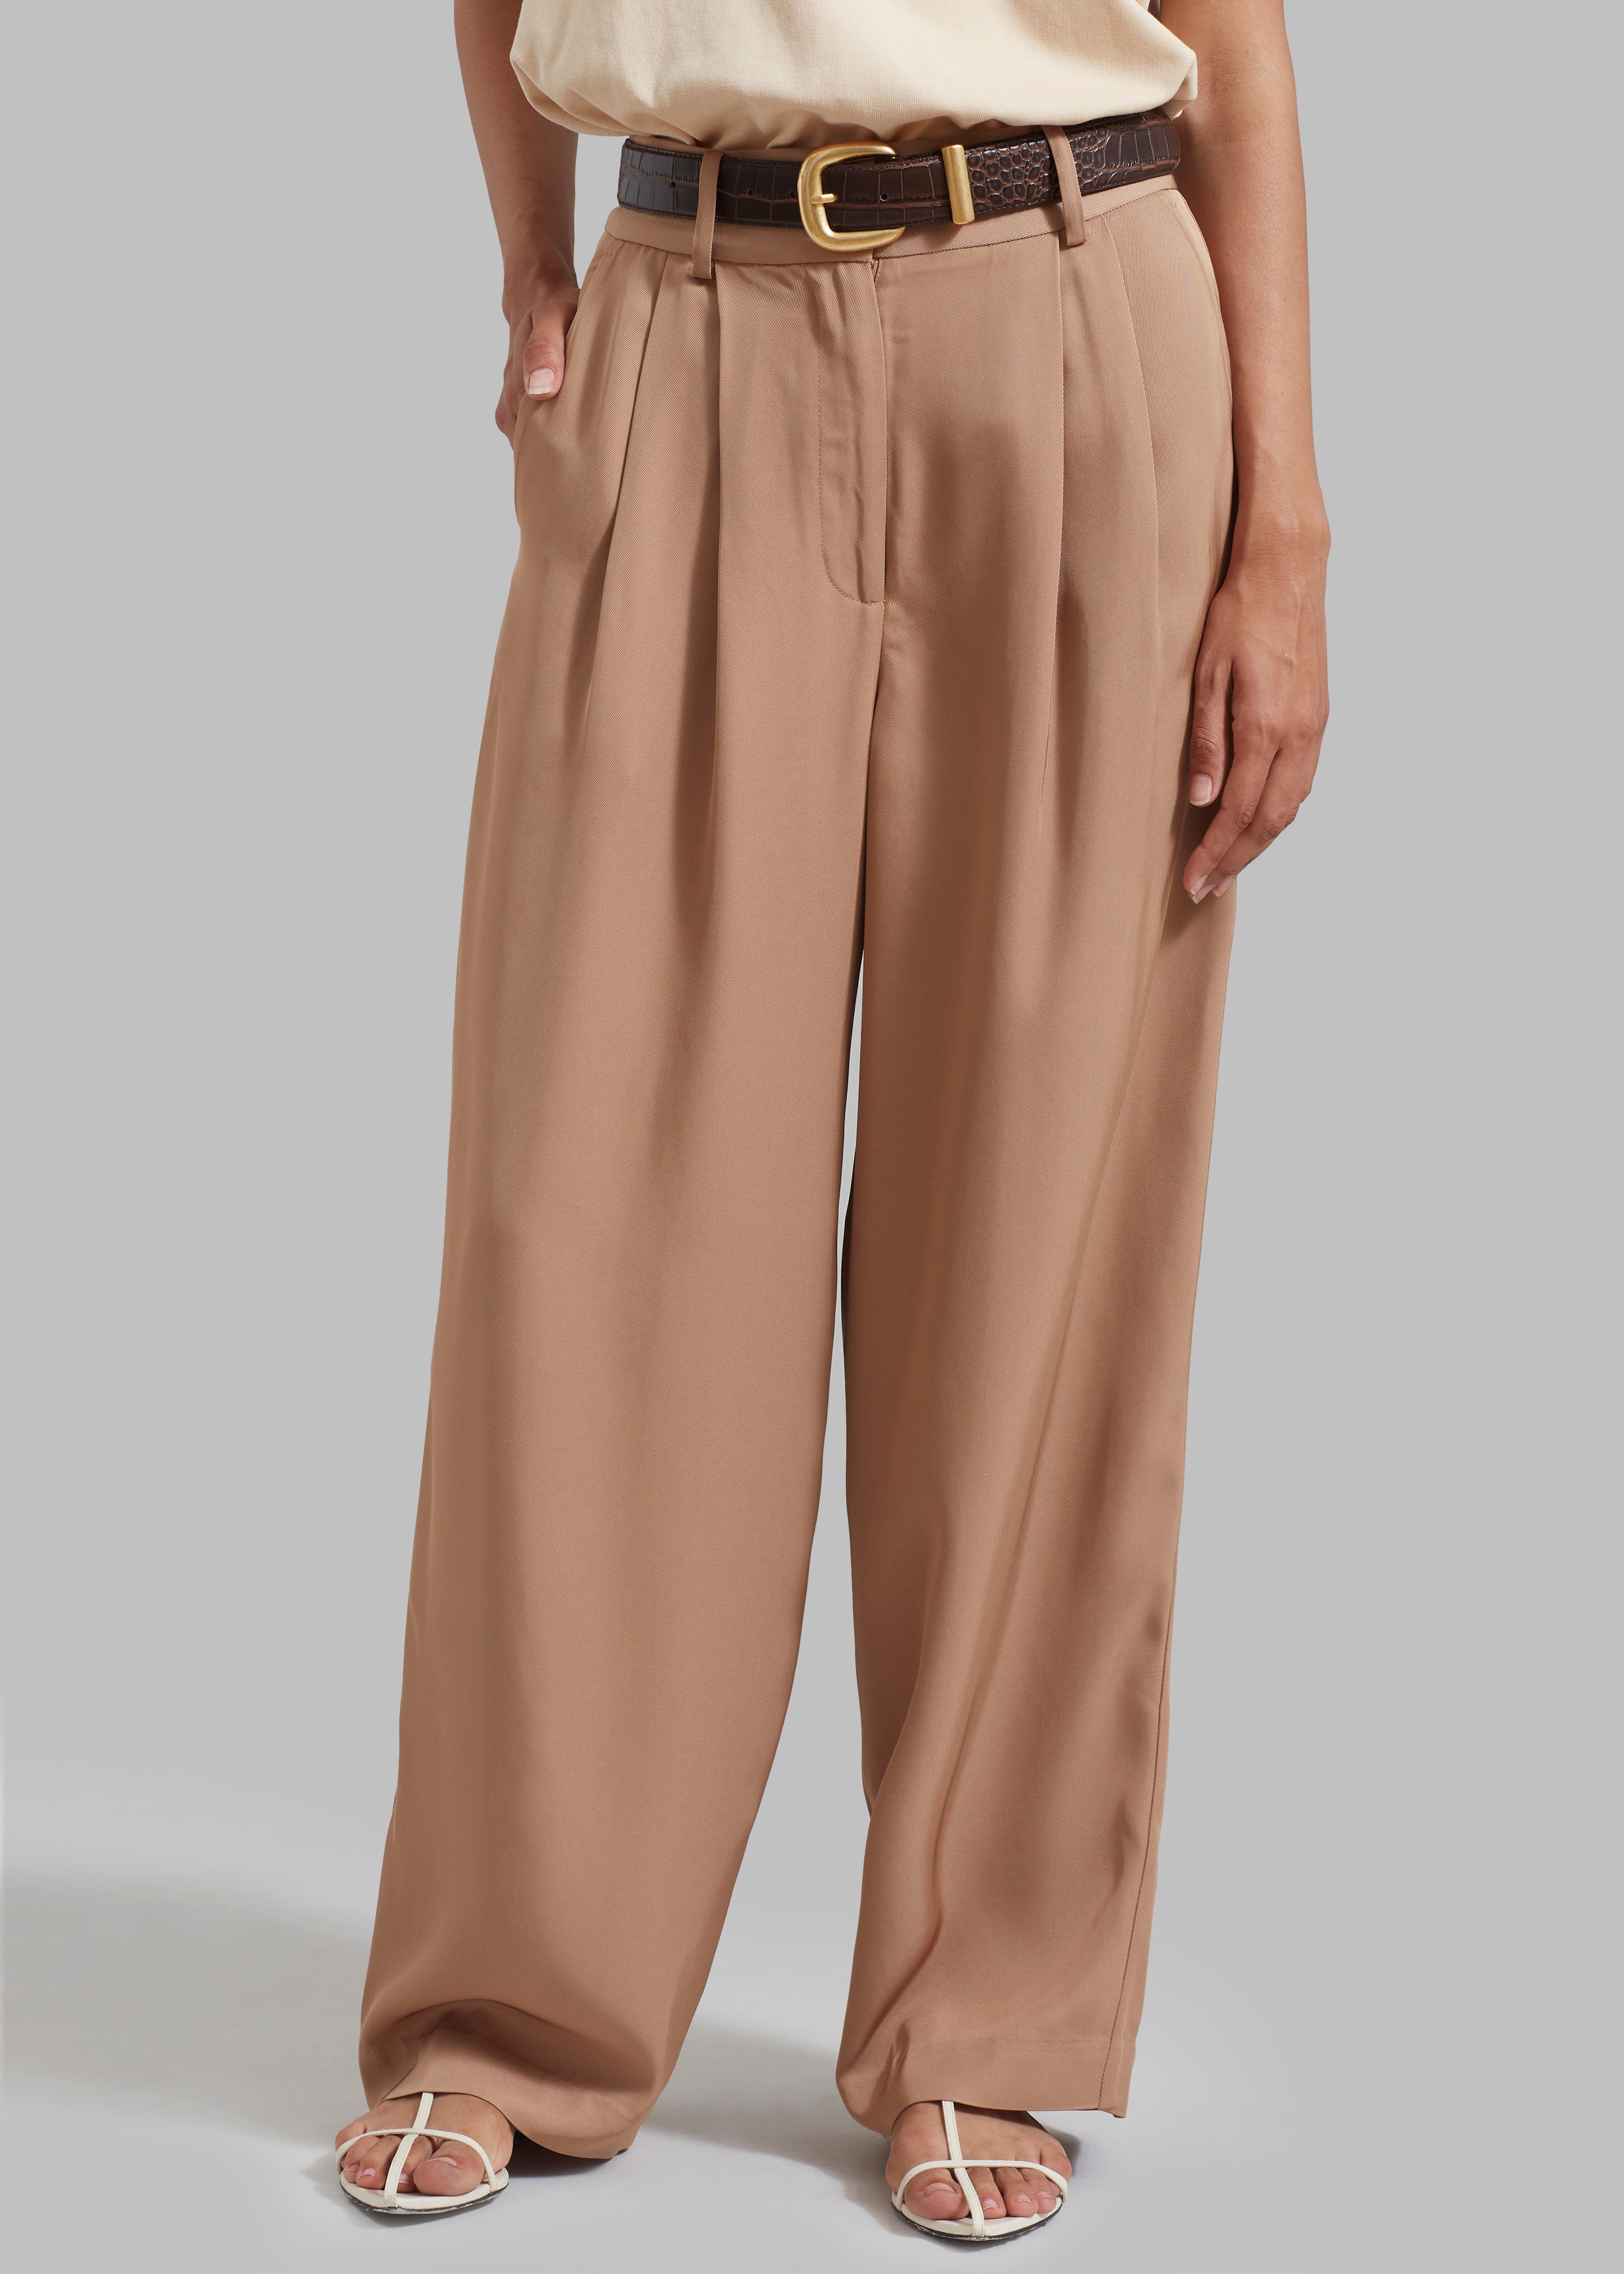 By Malene Birger Piscali Mid-Rise Pants - Tobacco Brown - 2